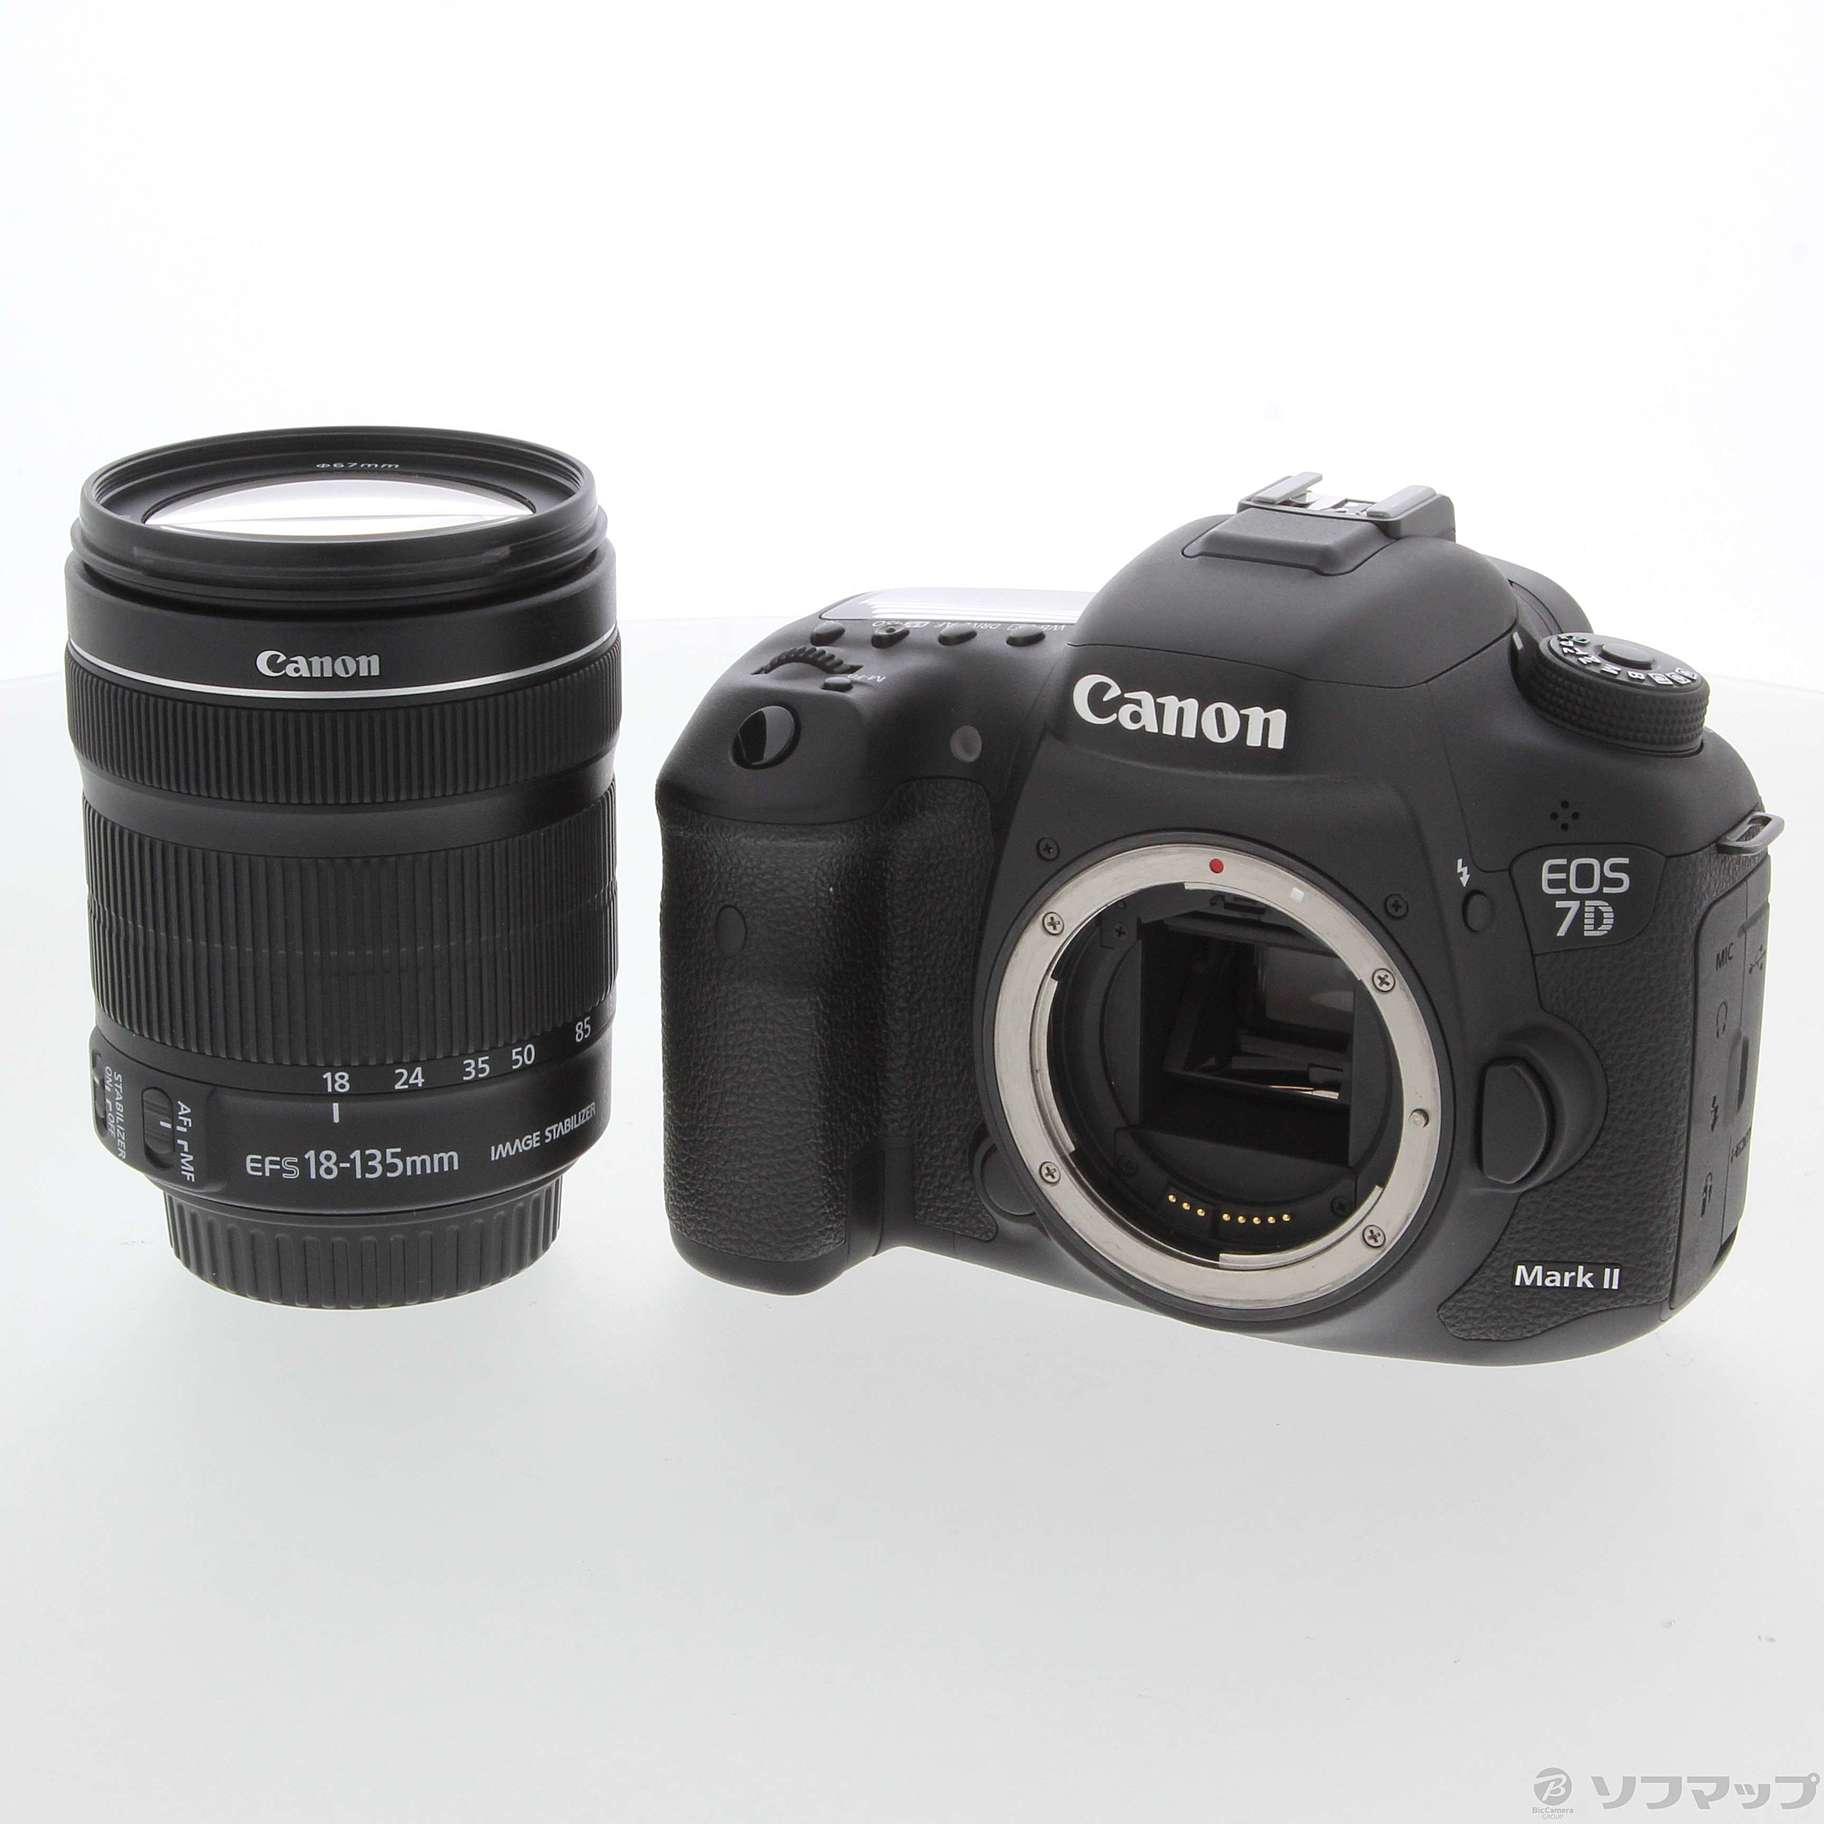 EF-S18-135mm  IS STM CANON EOS 7D MARKⅡ